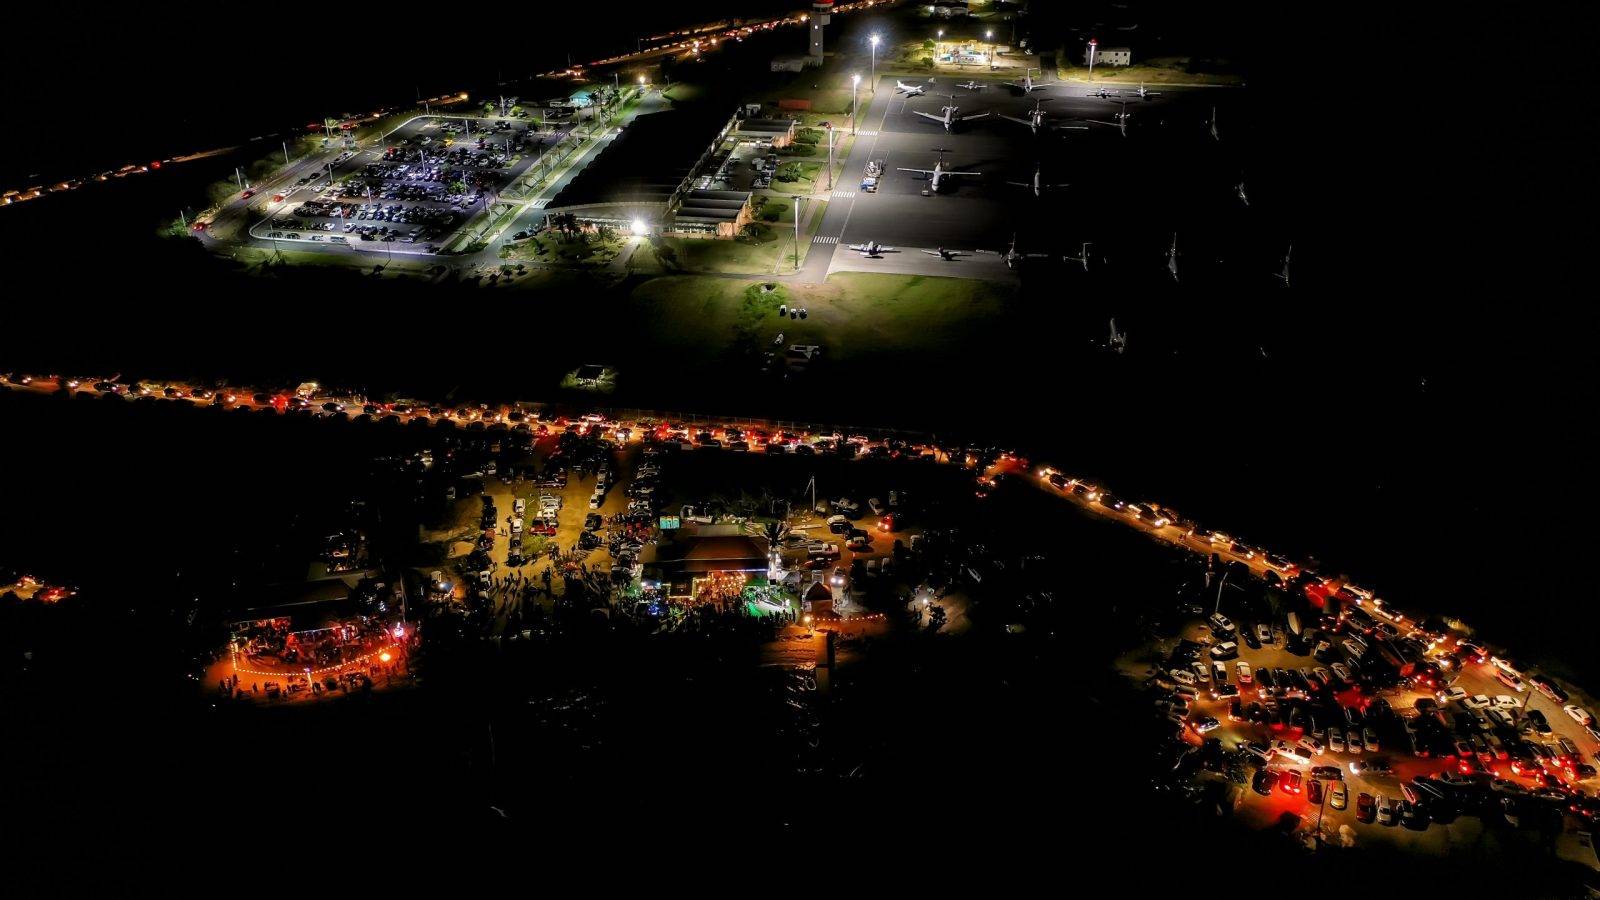 An aerial view of the surrounding area at night